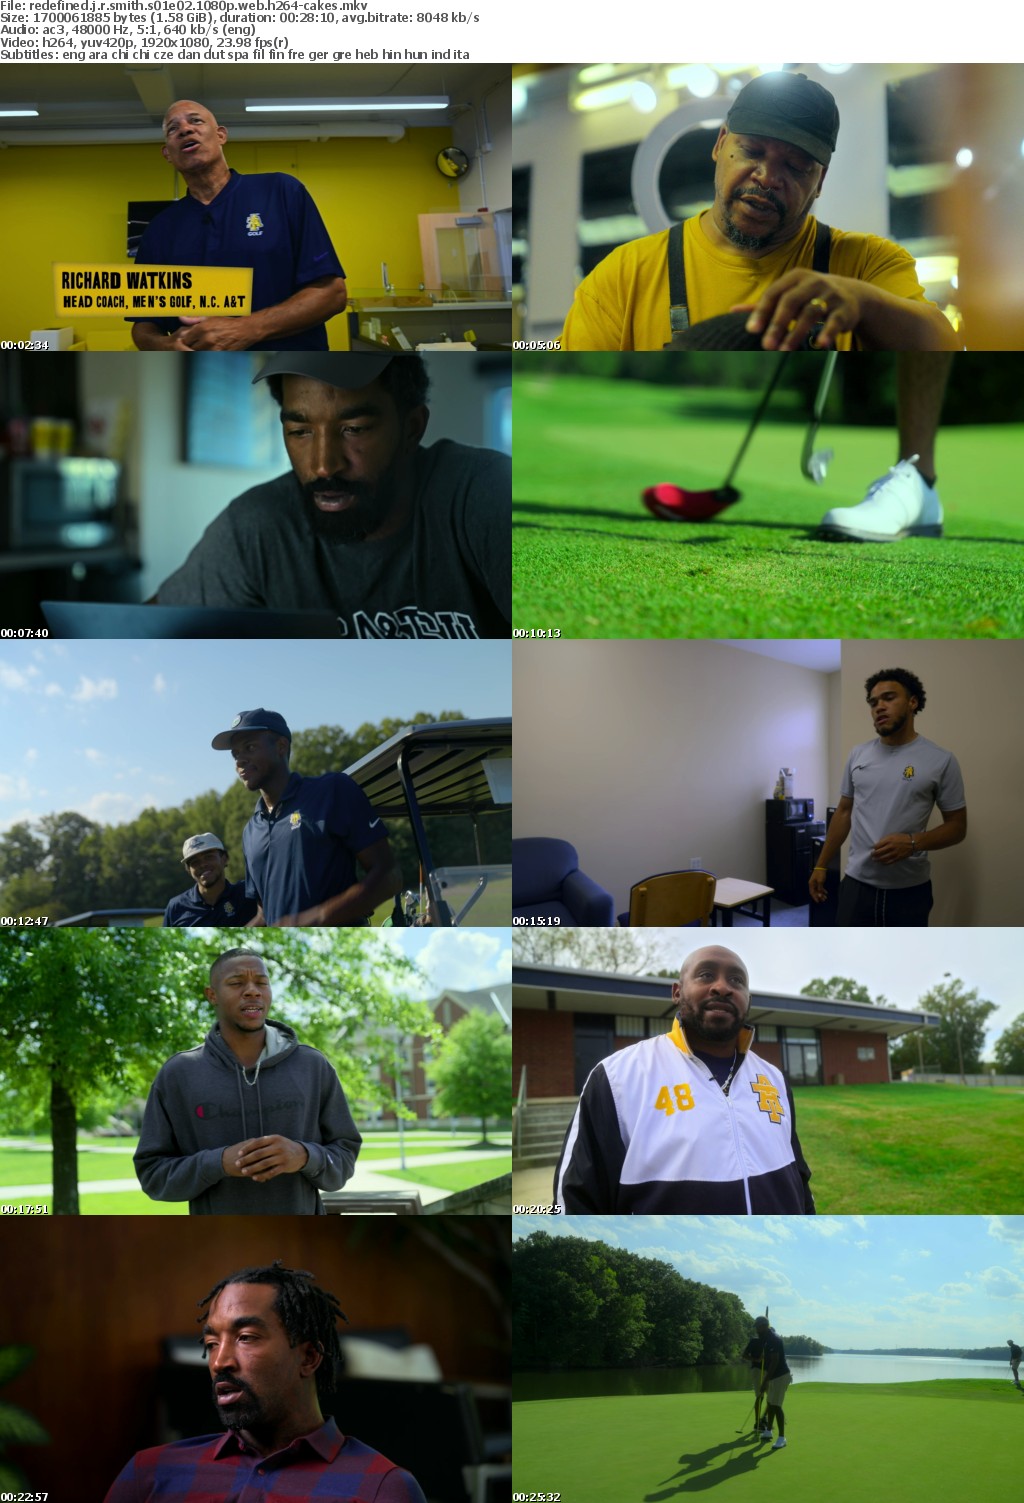 Redefined J R Smith S01E02 1080p WEB H264-CAKES